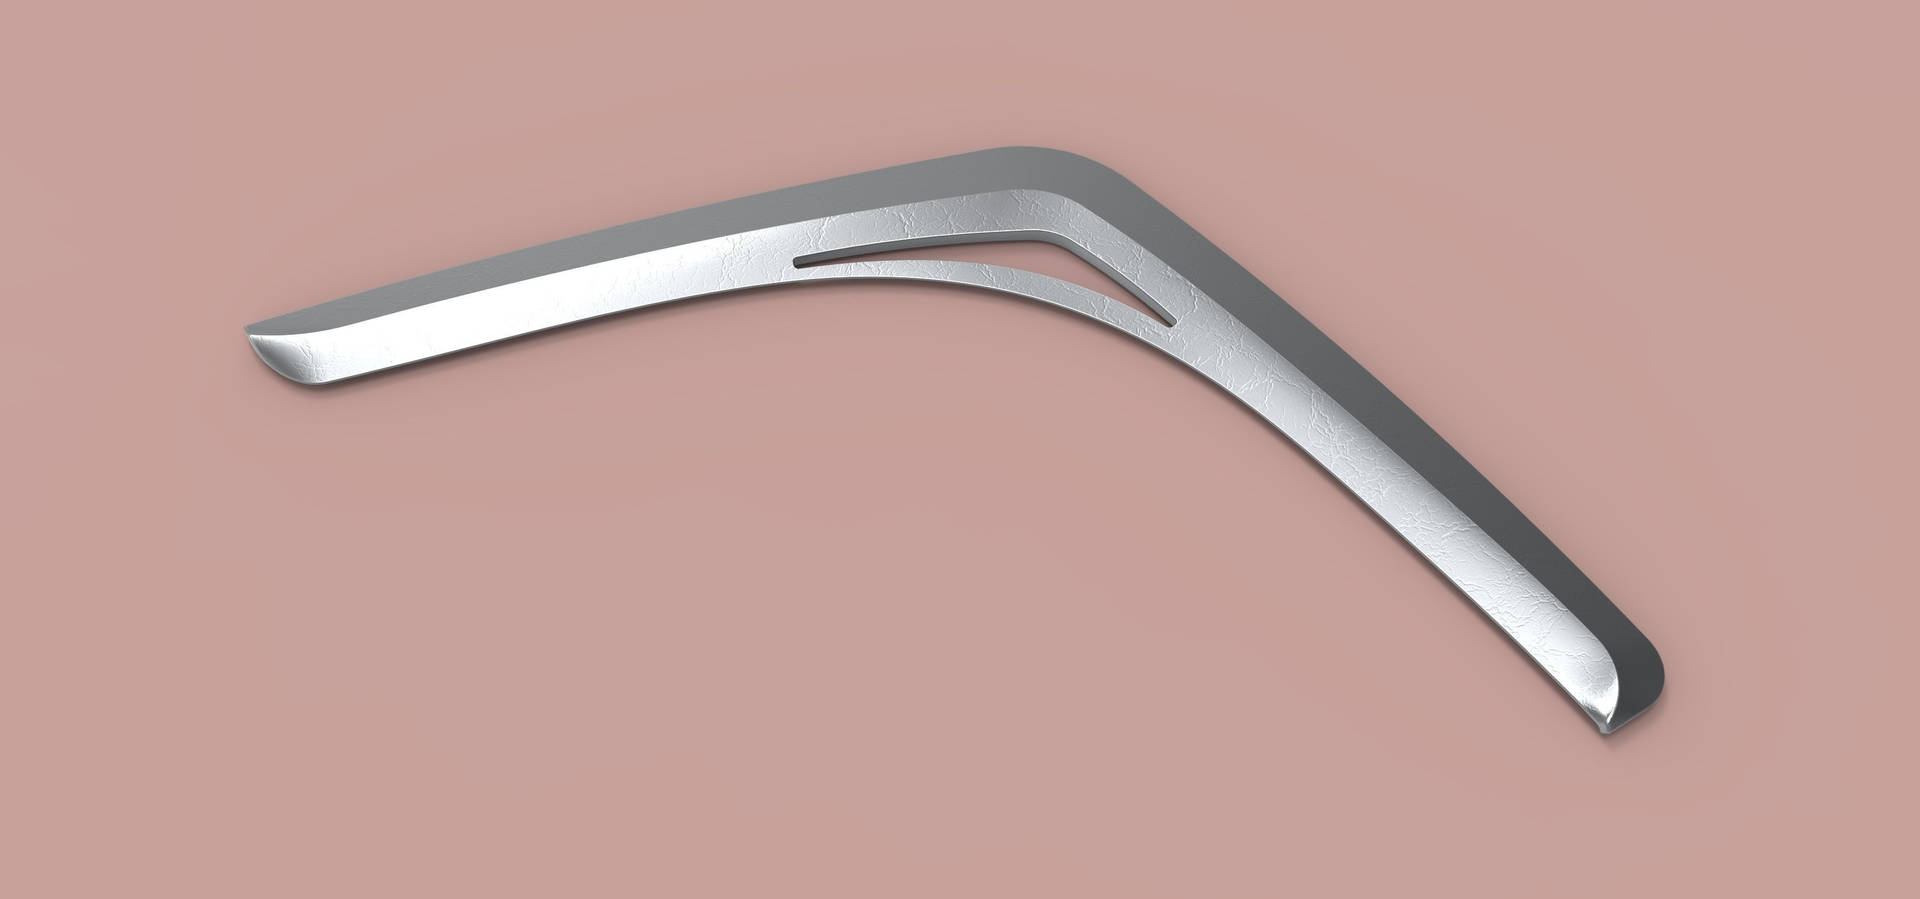 Two Sided Silver Boomerang Wallpaper